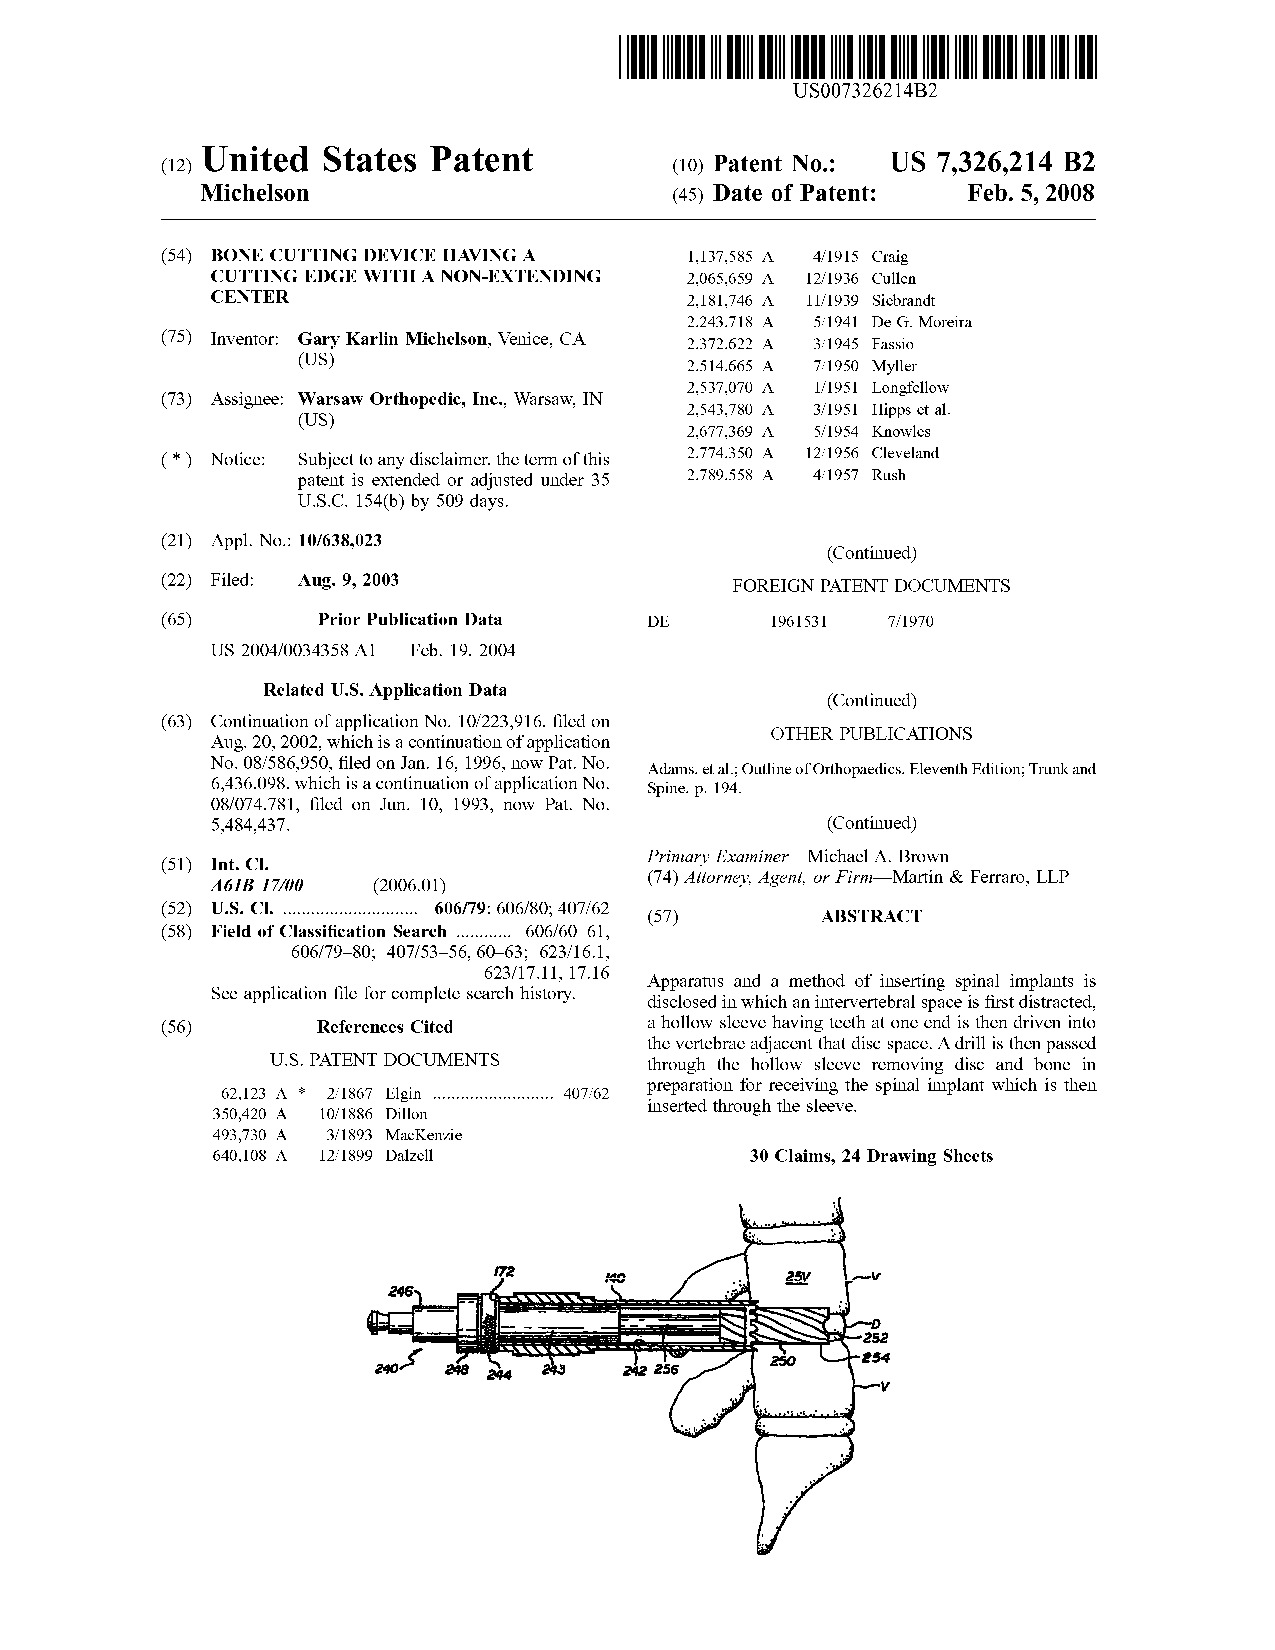 Bone cutting device having a cutting edge with a non-extending center - Patent 7,326,214